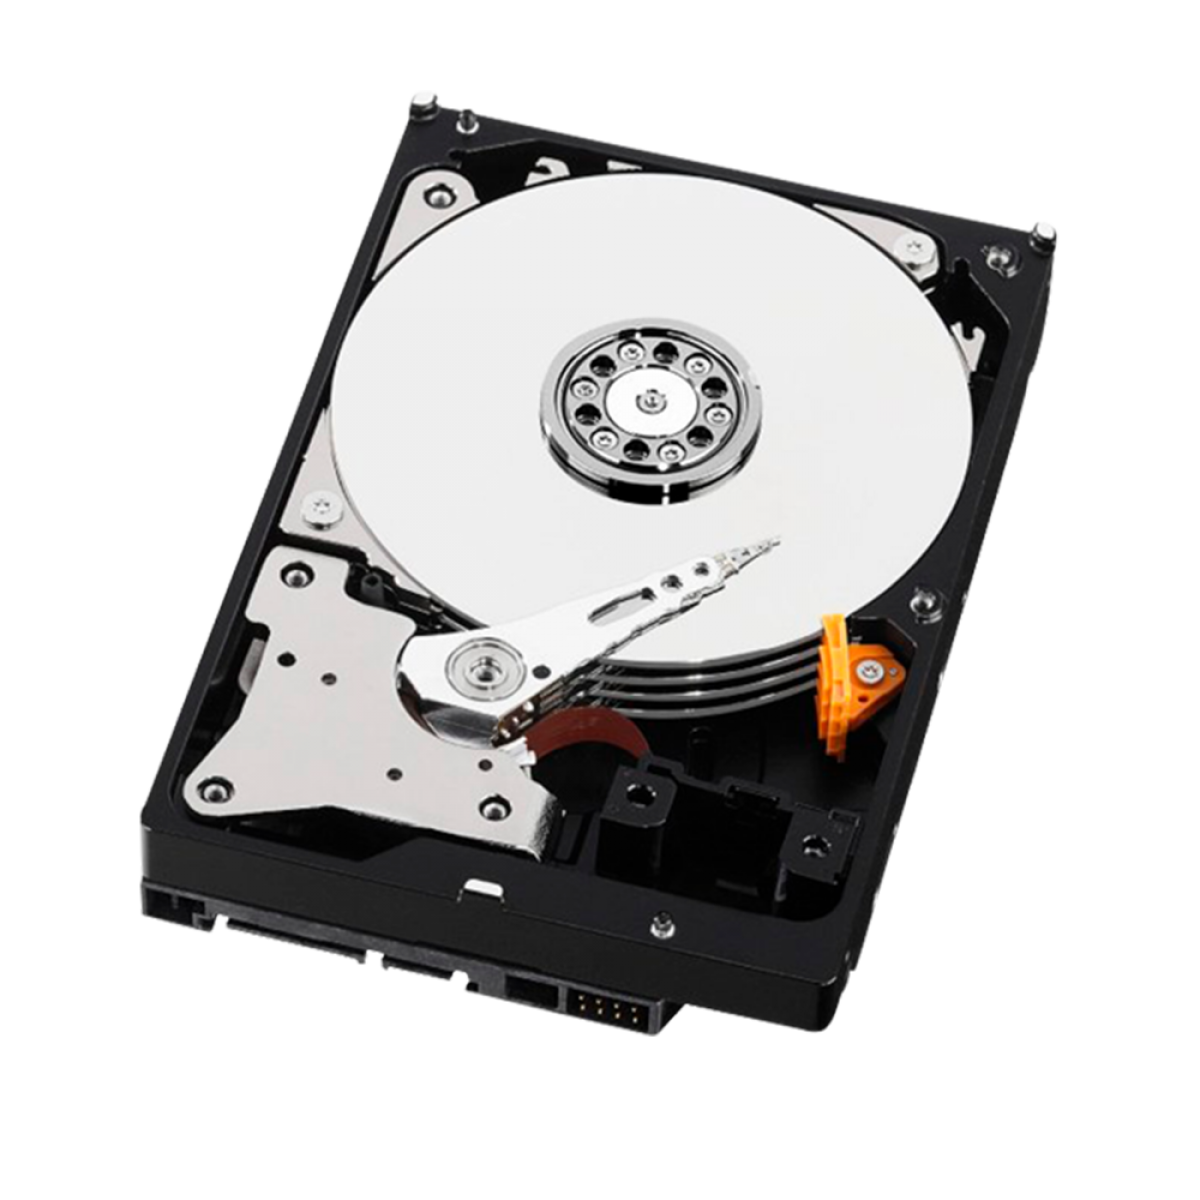 HD WD Red, 1TB, SATA, 5400RPM, NAS, 3.5', WD10EFRX